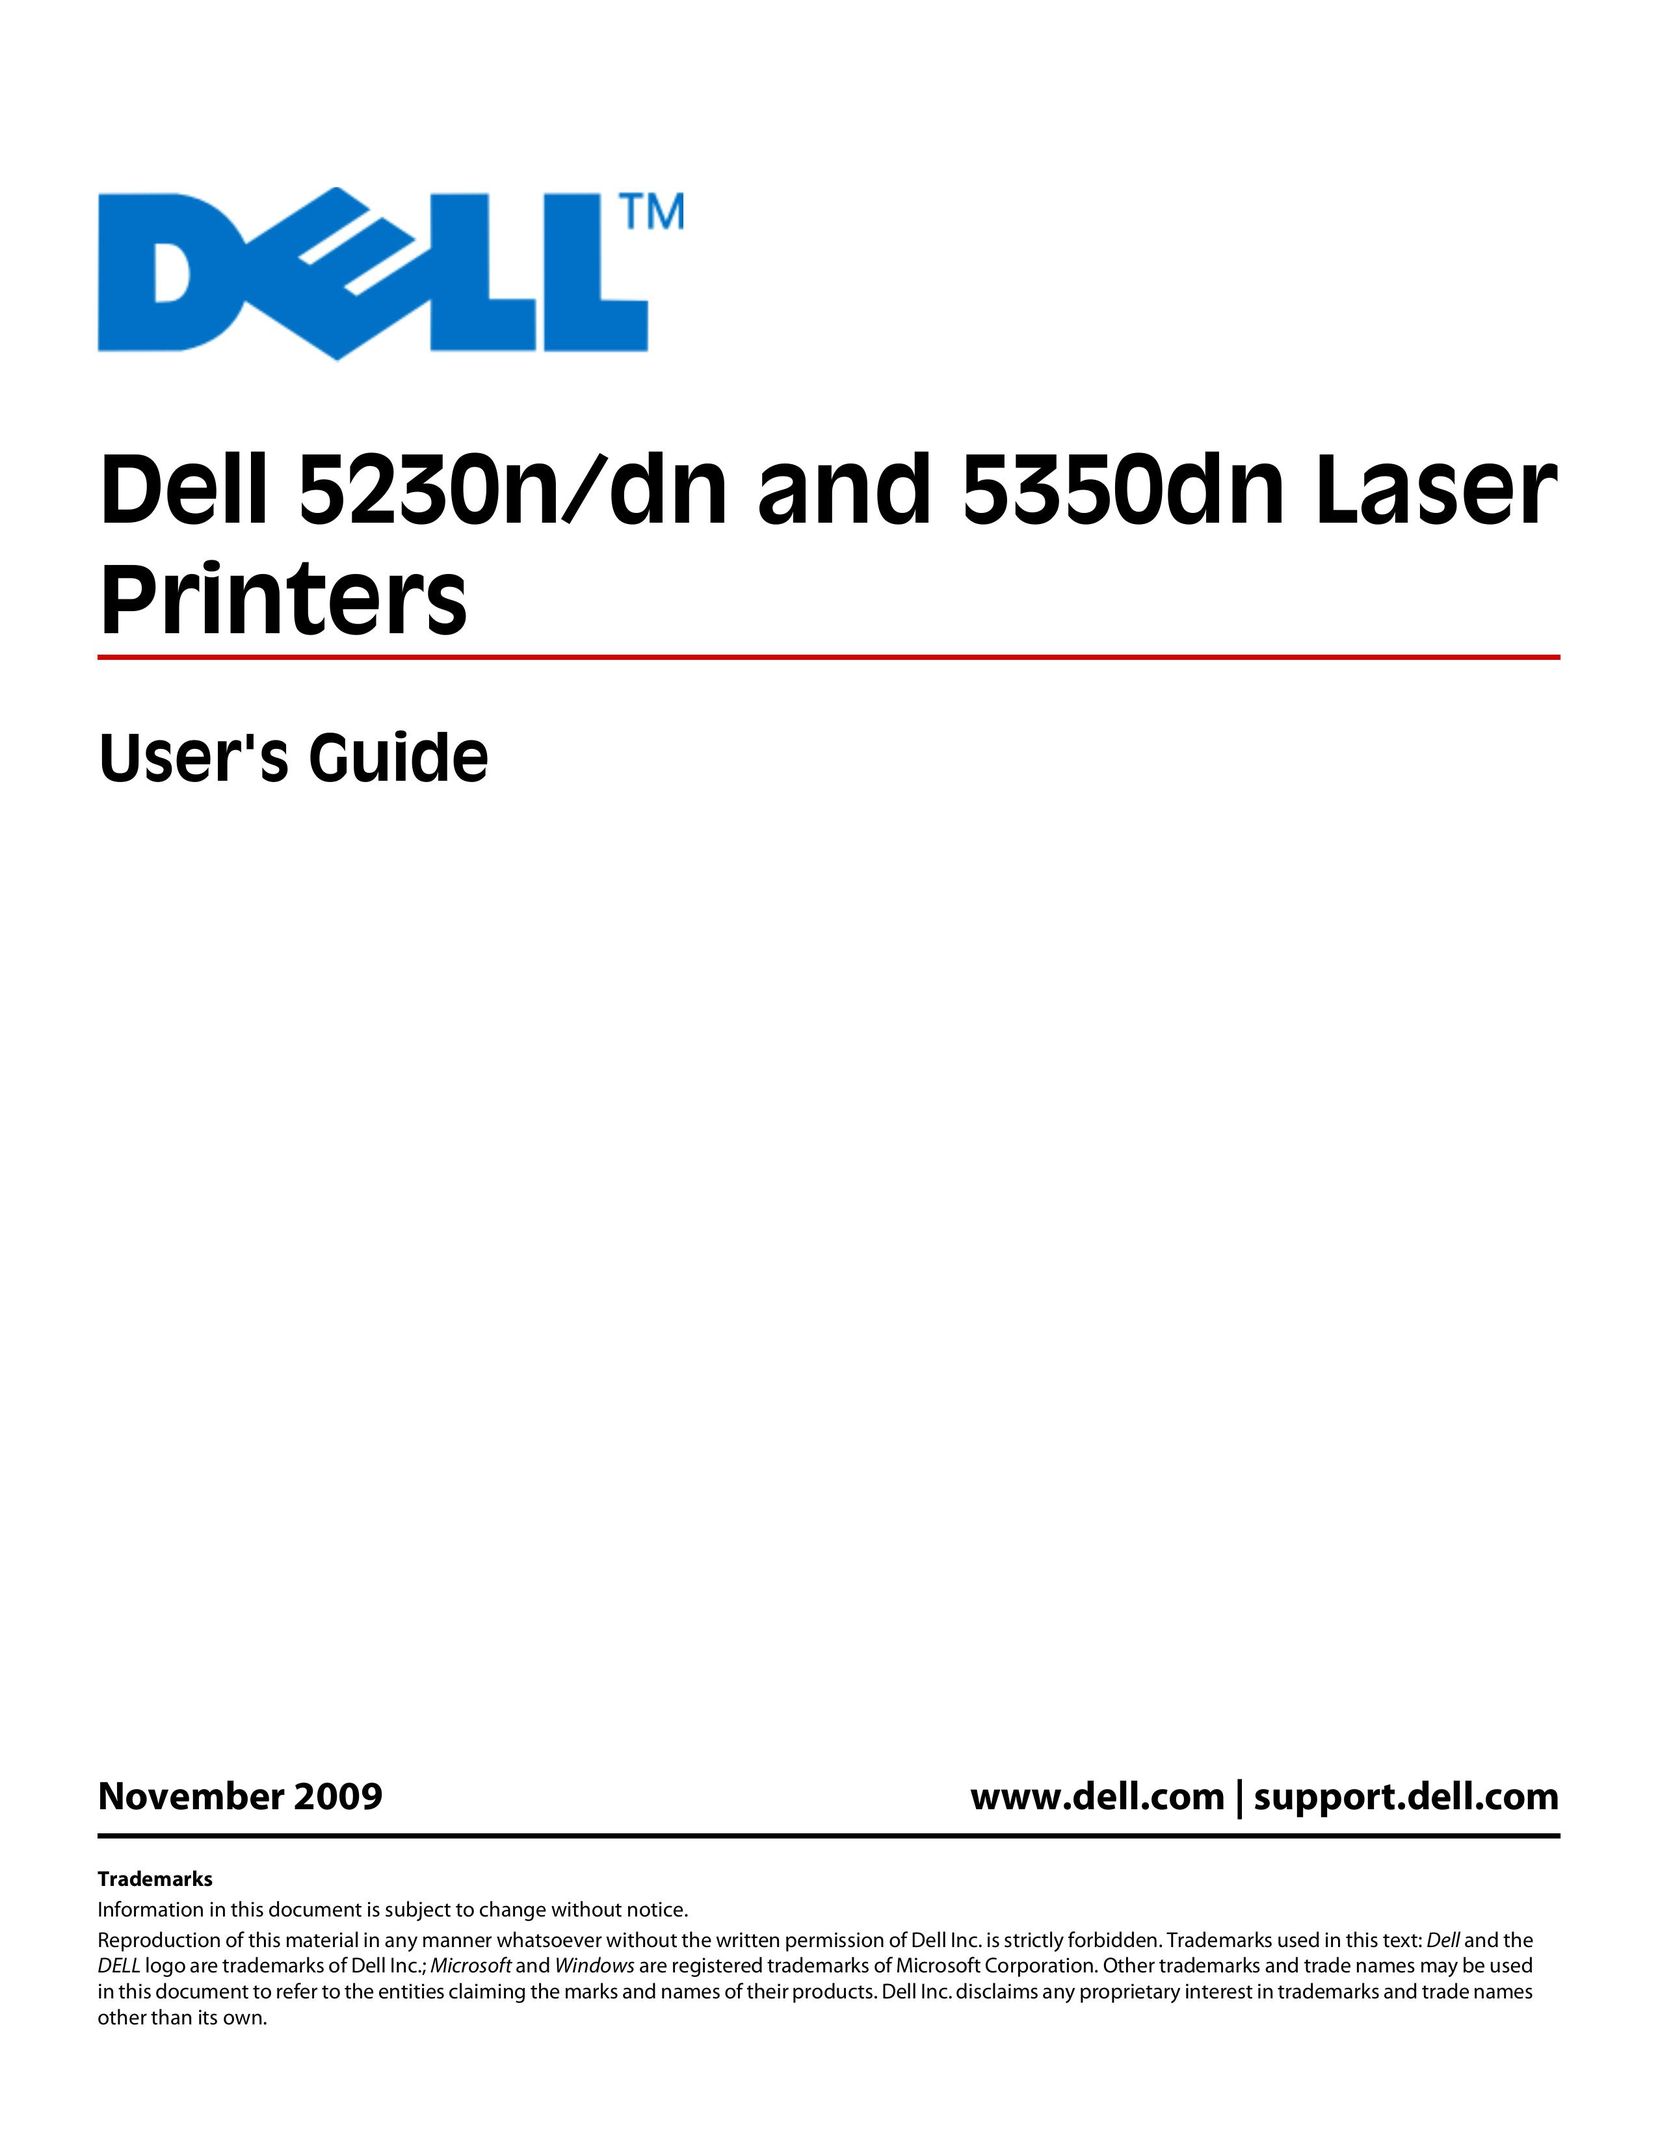 Dell 5230N/DN All in One Printer User Manual